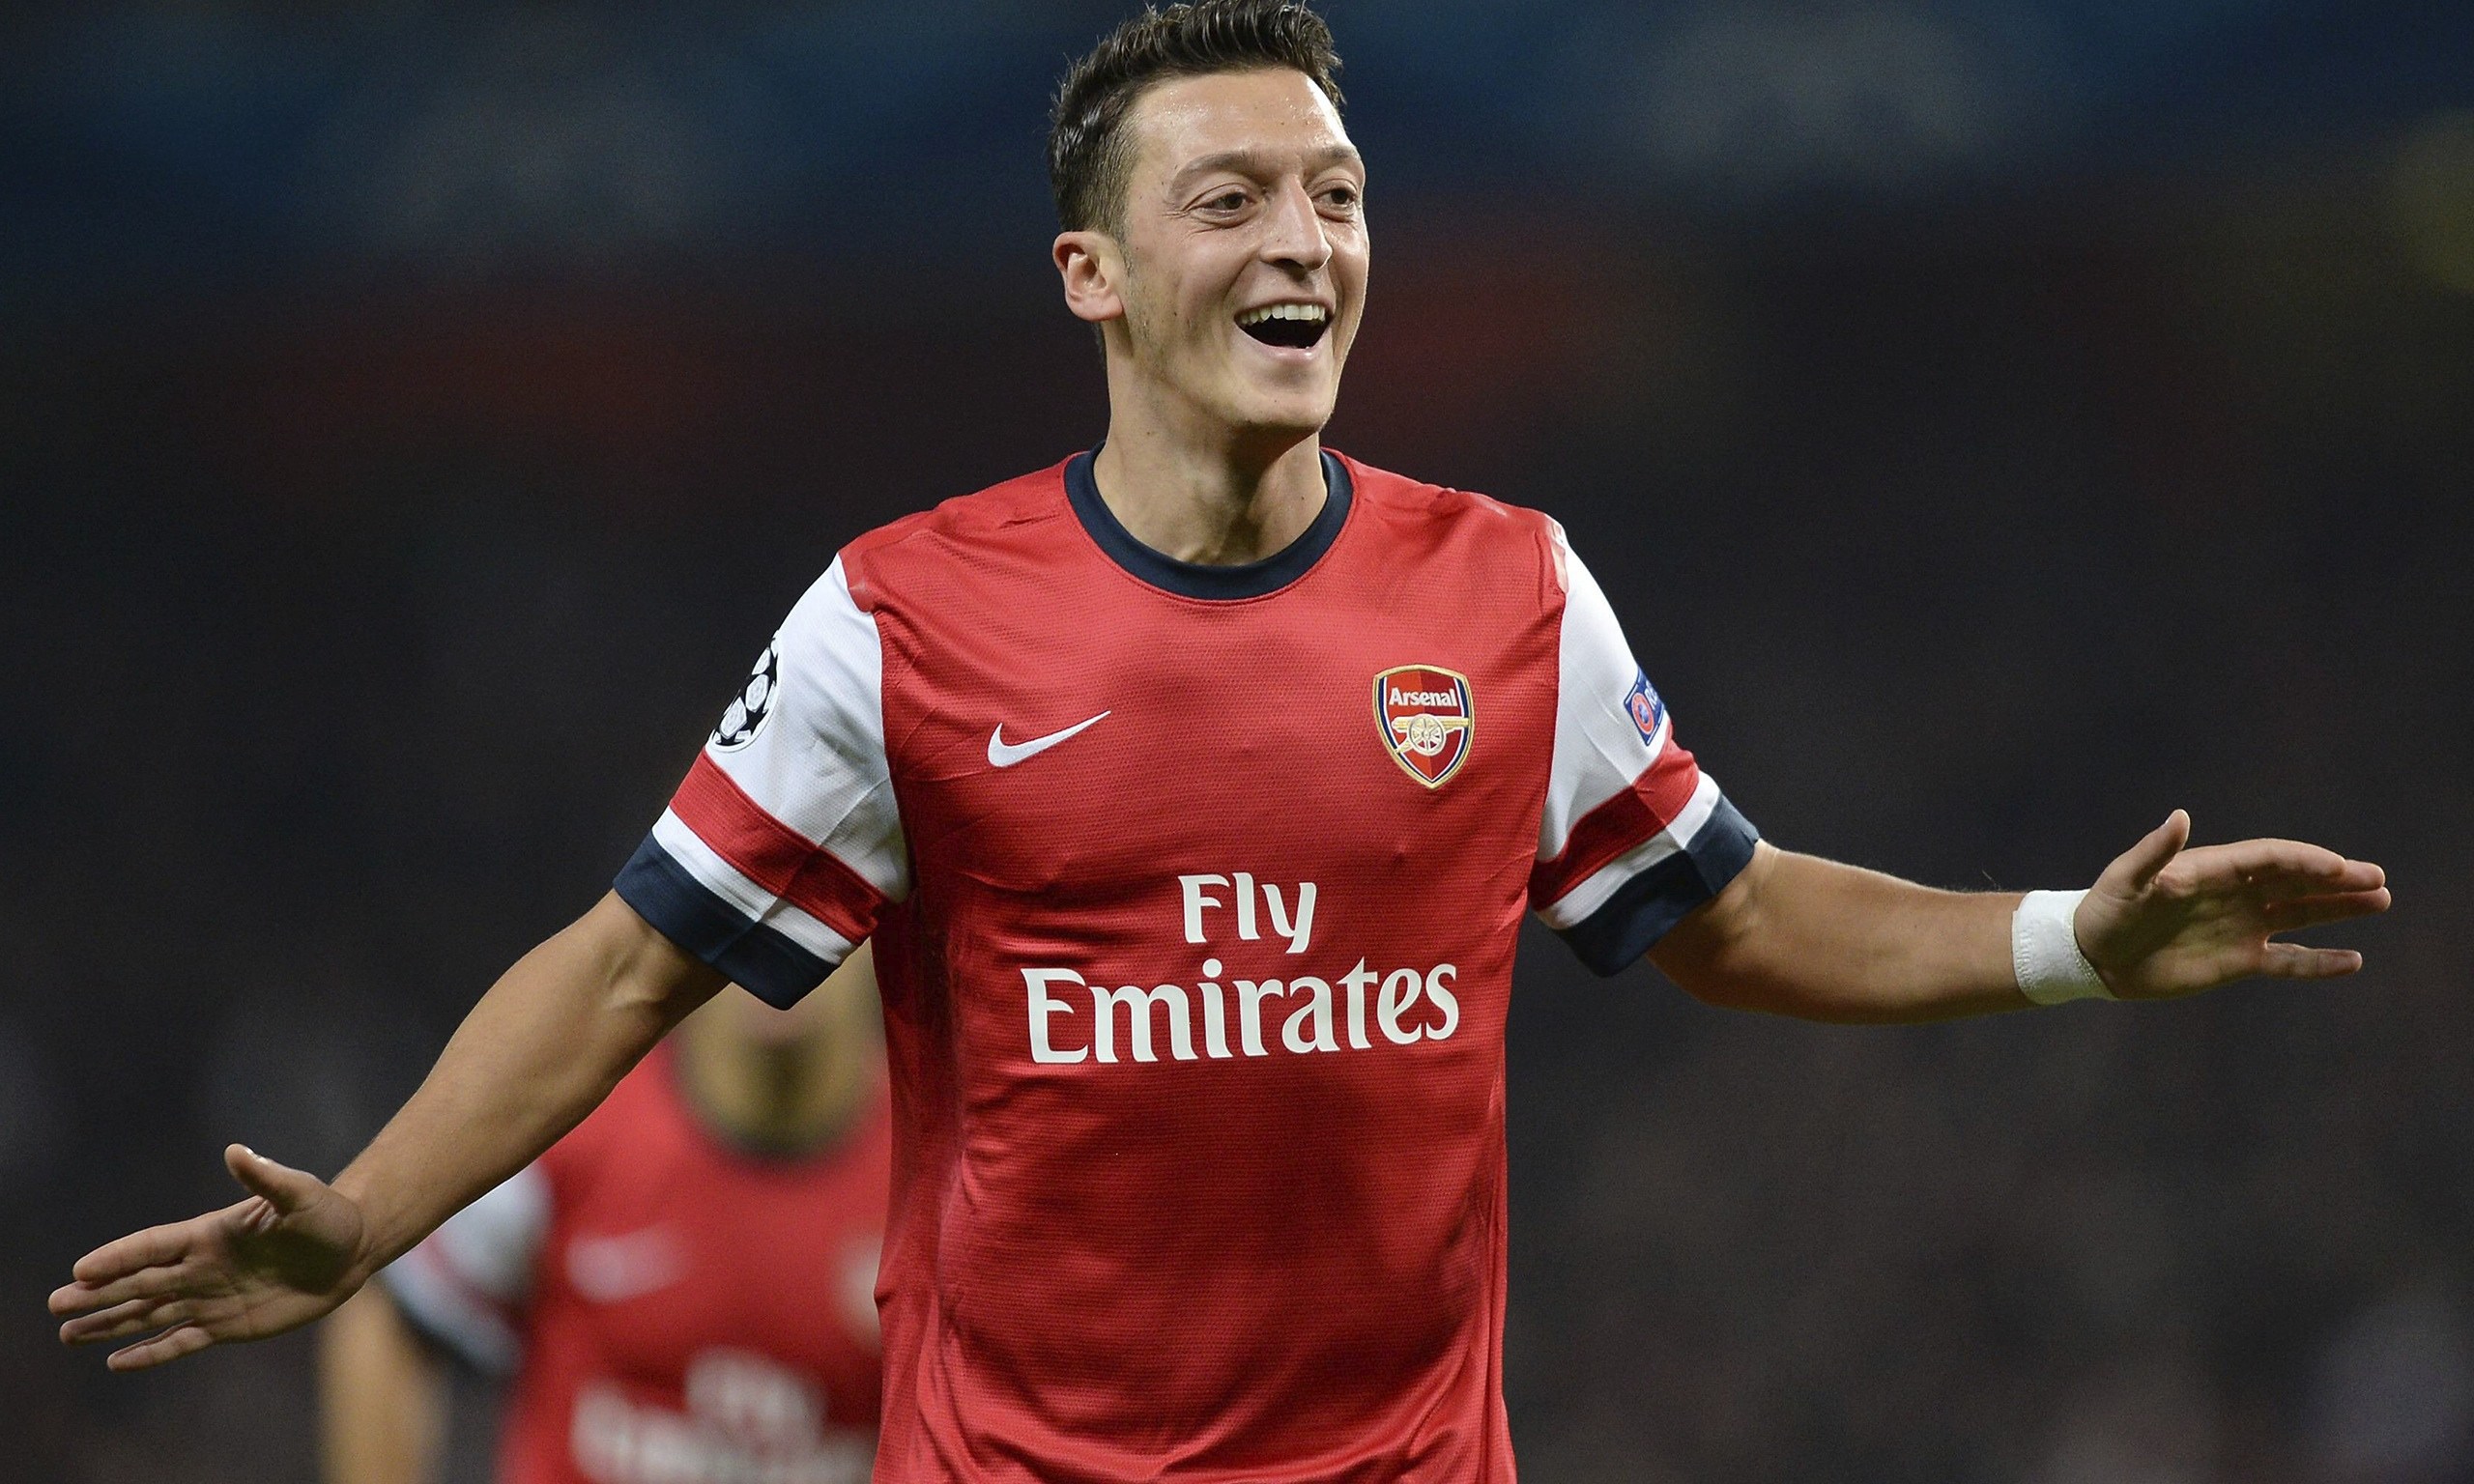 The Player Of Arsenal Mesut Ozil Is Happy After Victory Wallpapers And